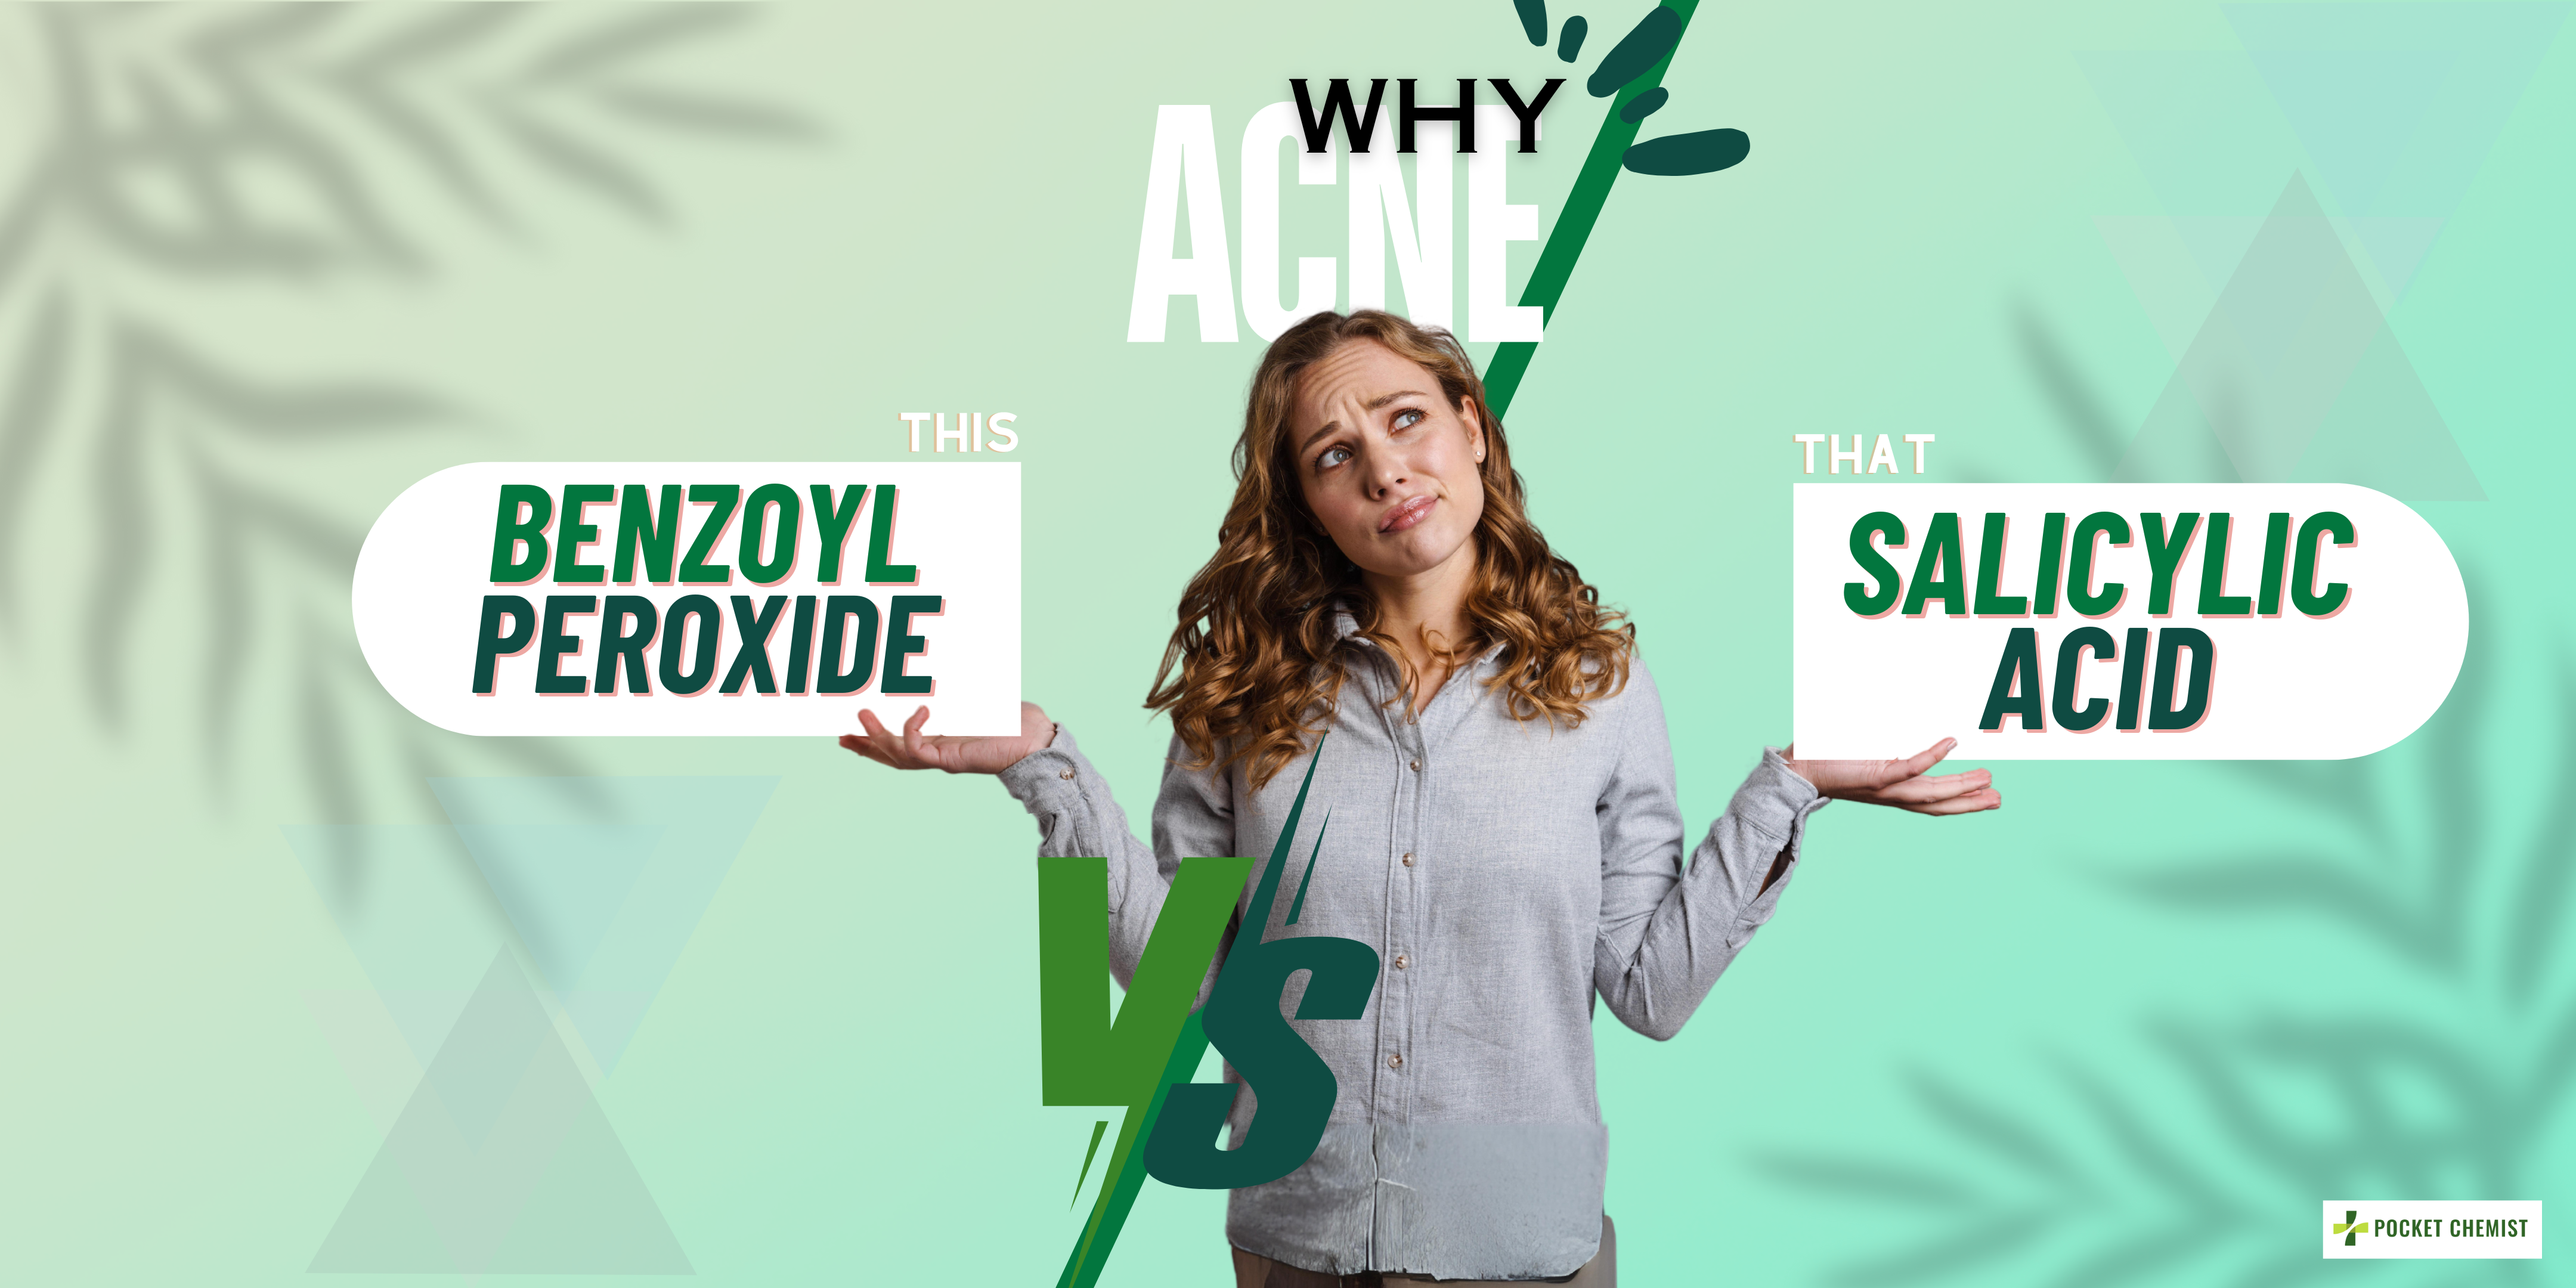 Benzoyl Peroxide vs. Salicylic Acid: Which is Best for Acne?